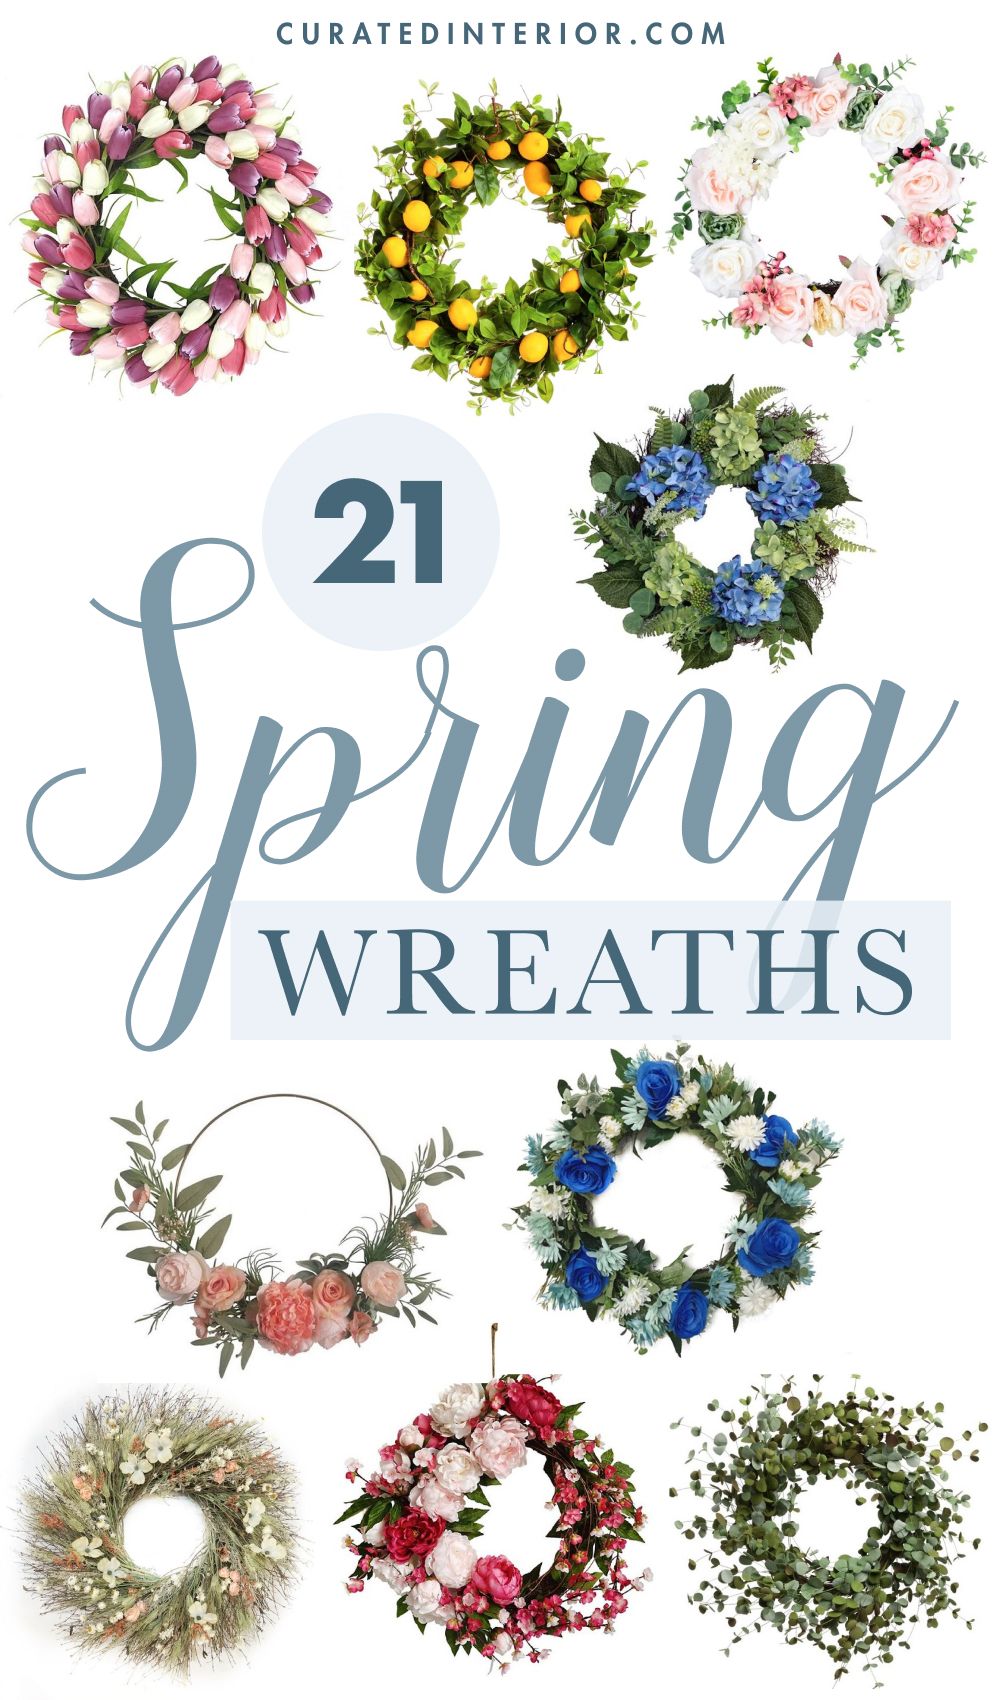 21 Amazing Spring Wreaths to Buy Online